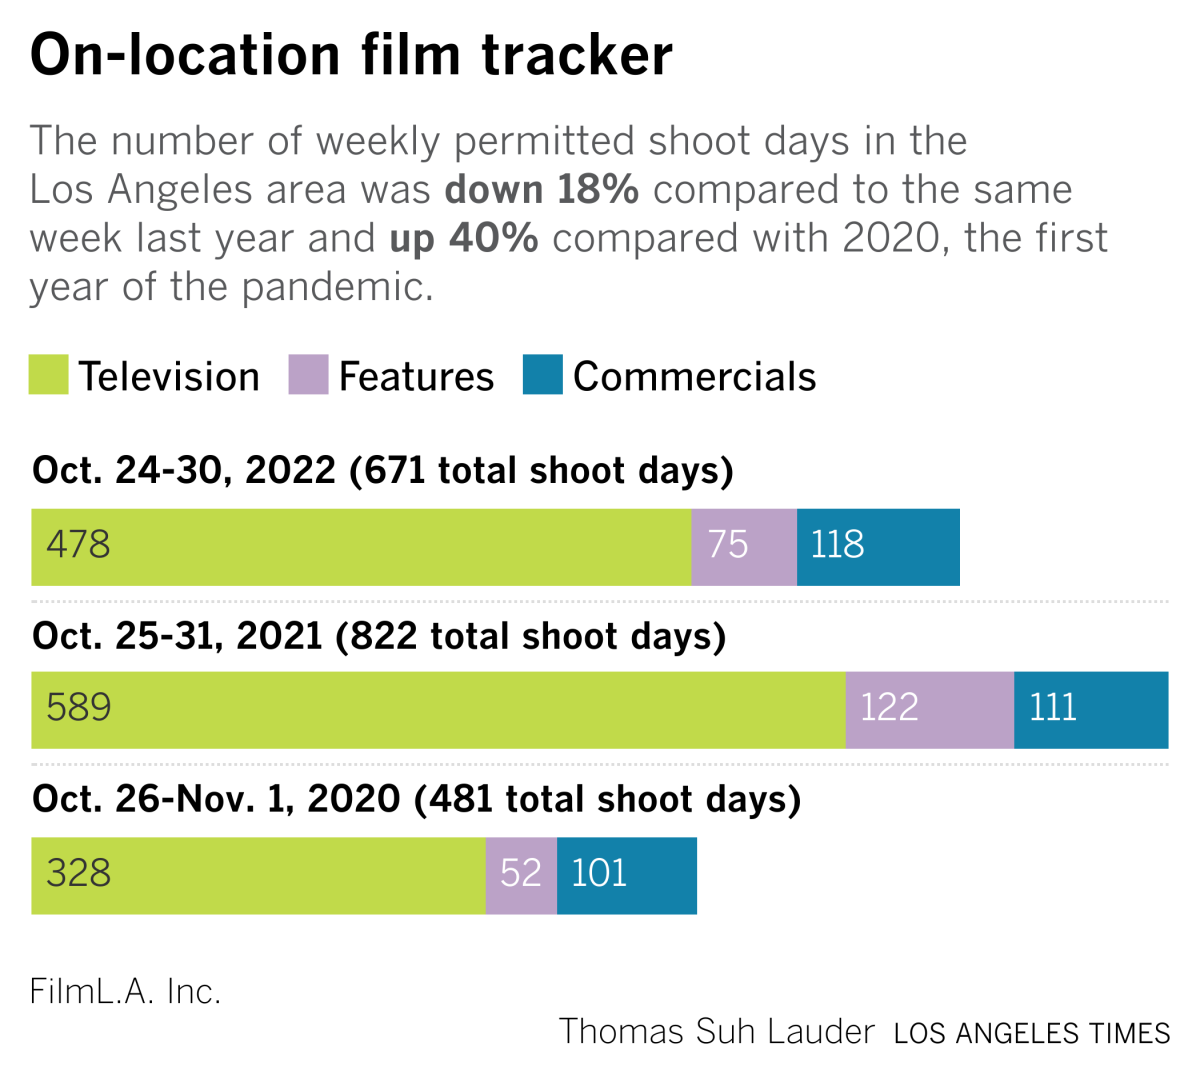 A chart showing the number of permitted shooting days in the Los Angeles area for the last week in October over three years